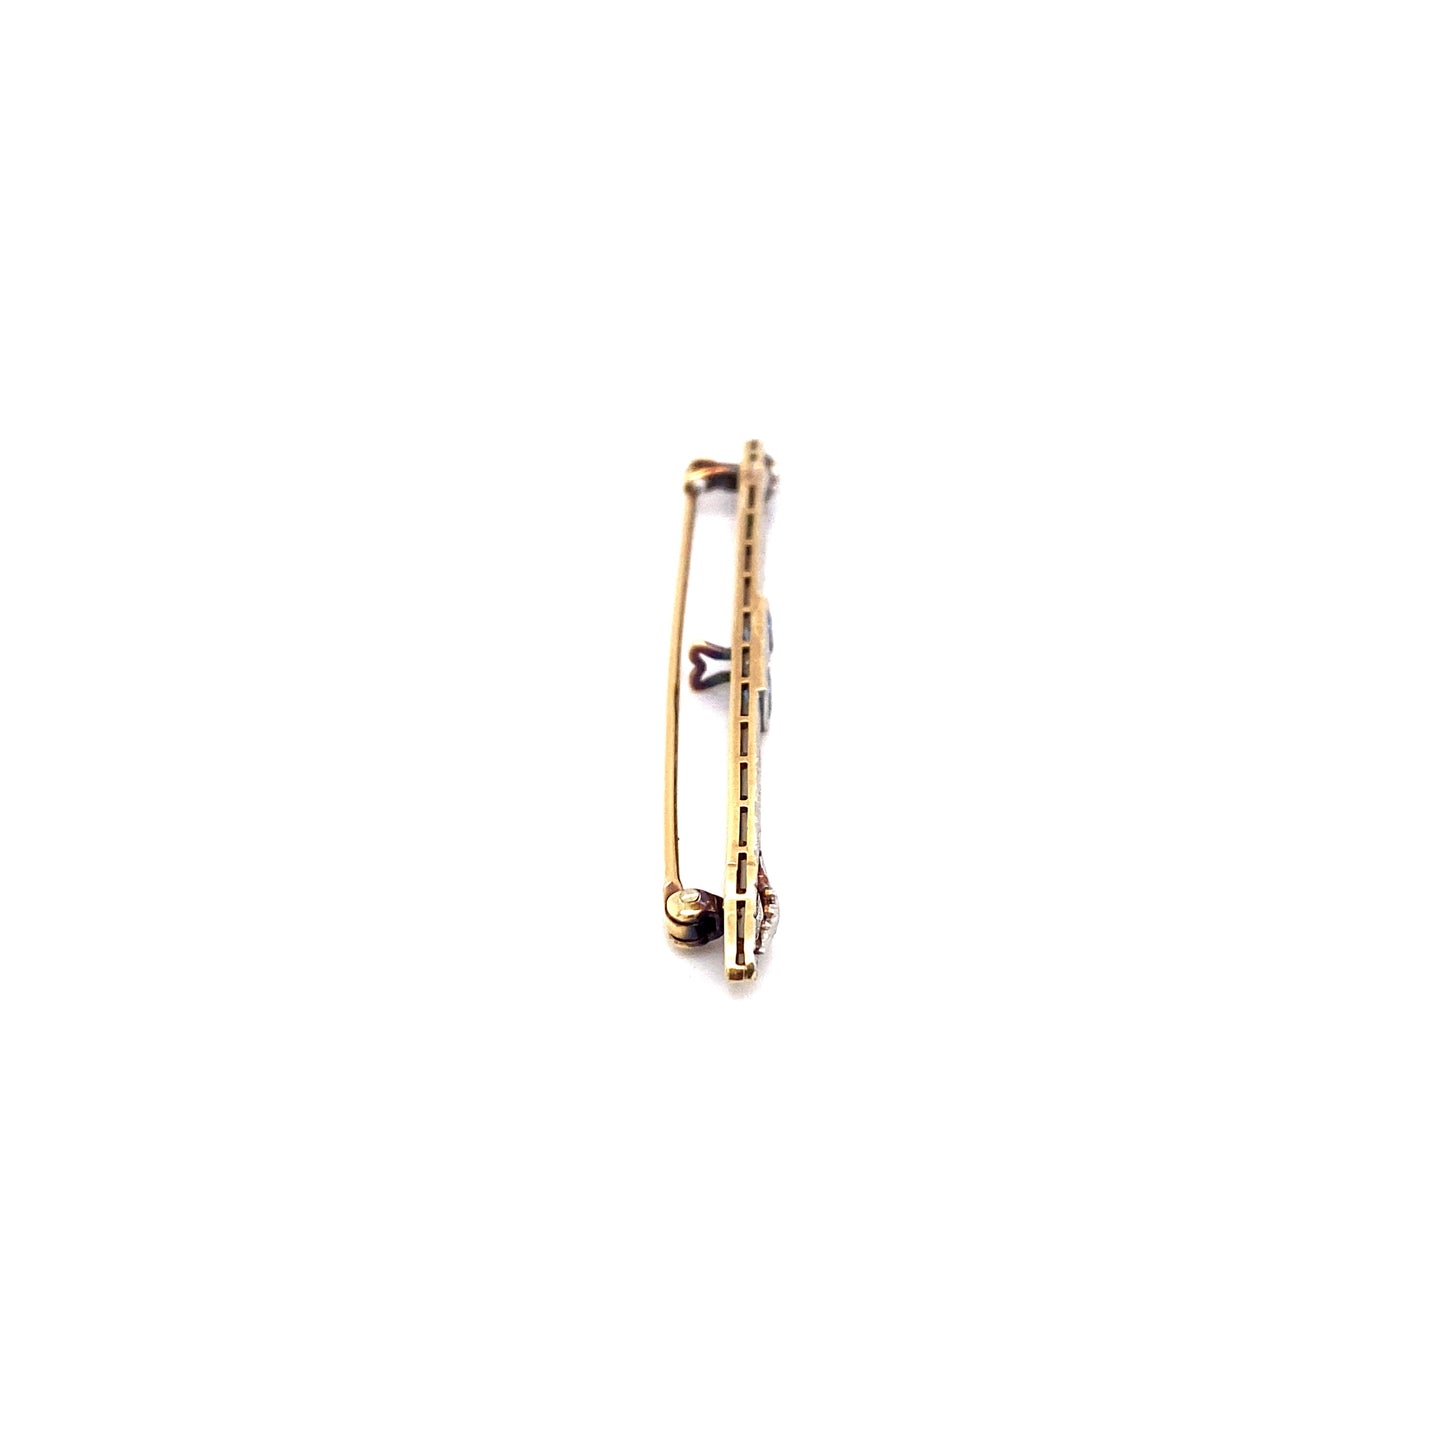 Circa 1920s Art Deco Diamond and Sapphire Bar Brooch in 14K Gold and Platinum